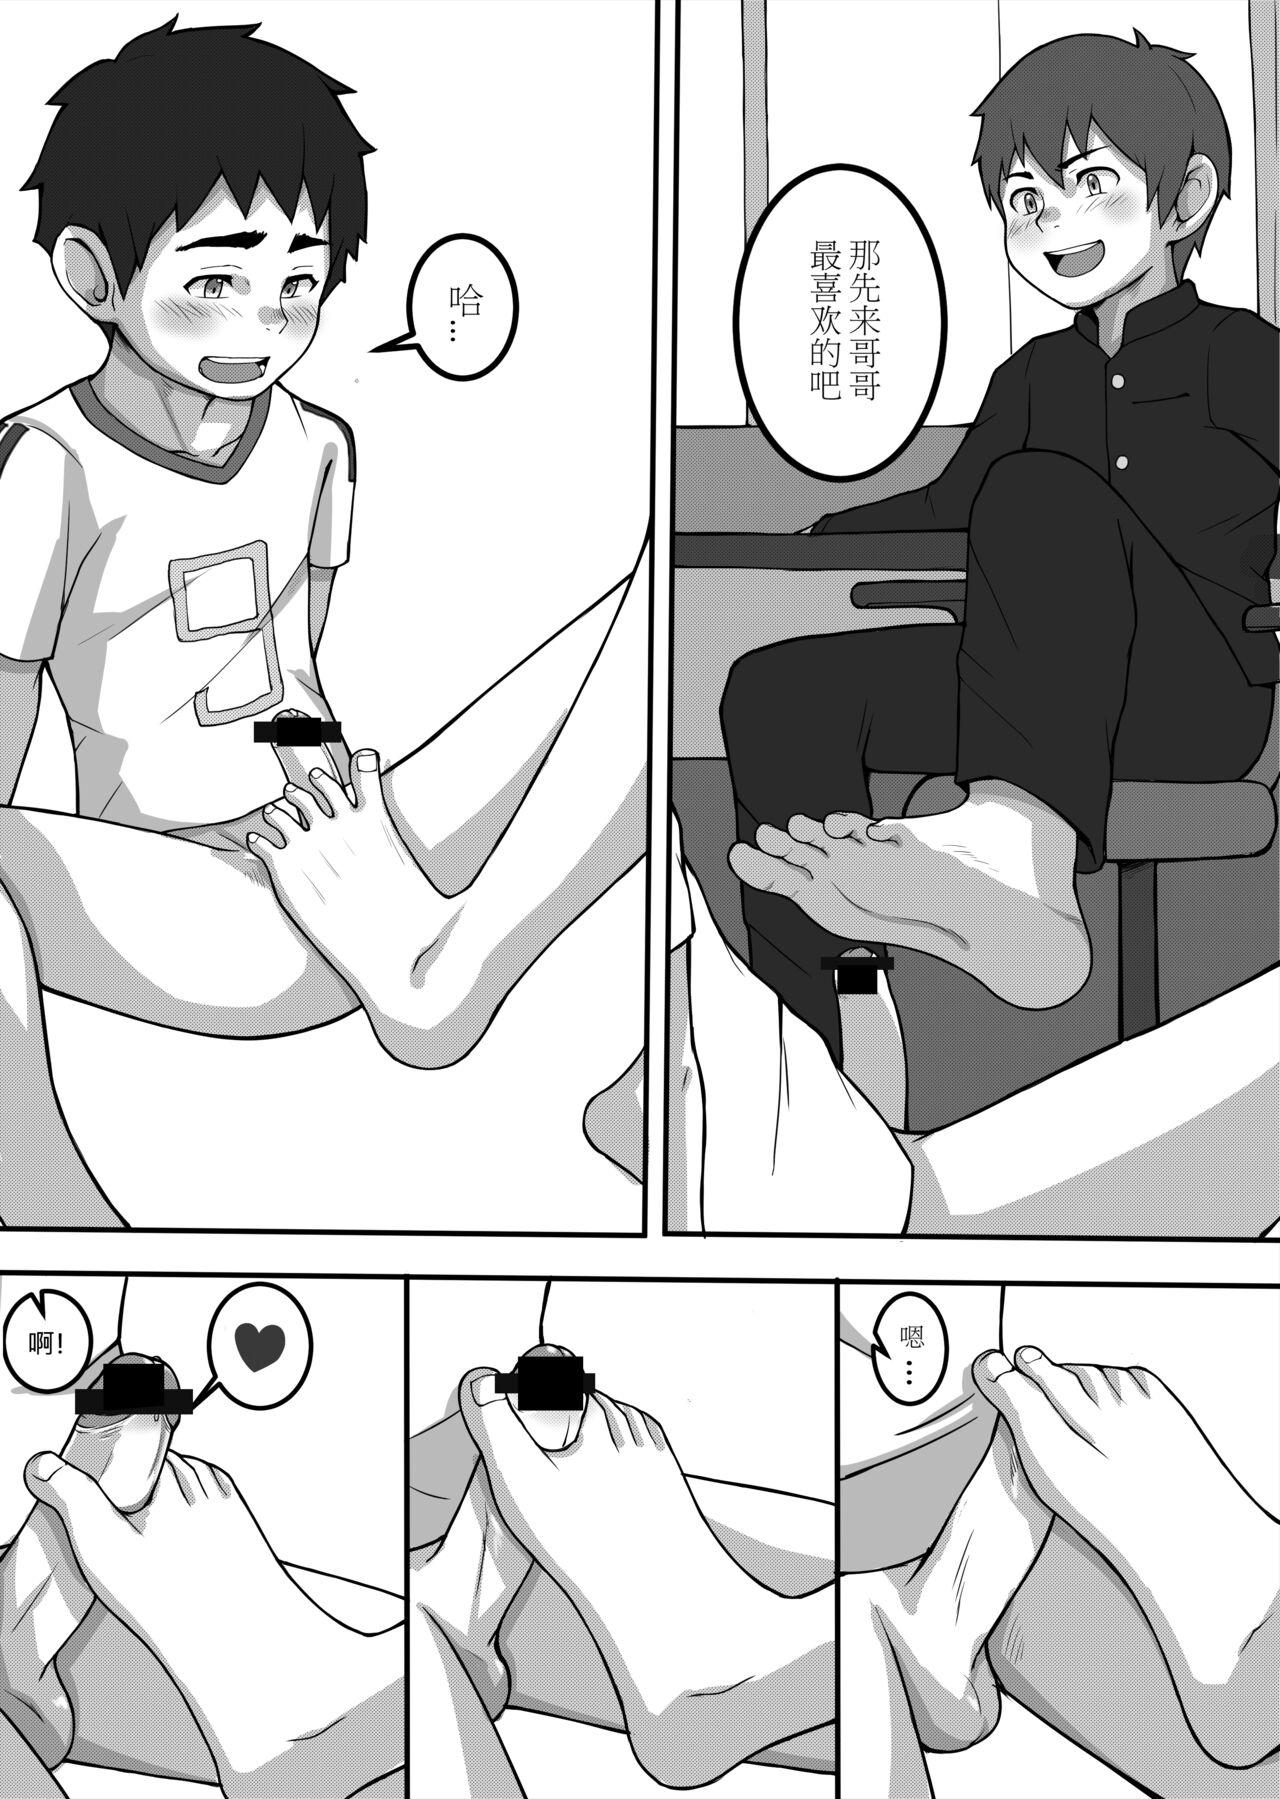 Inked 兄弟間的事 - Original Family Porn - Page 7